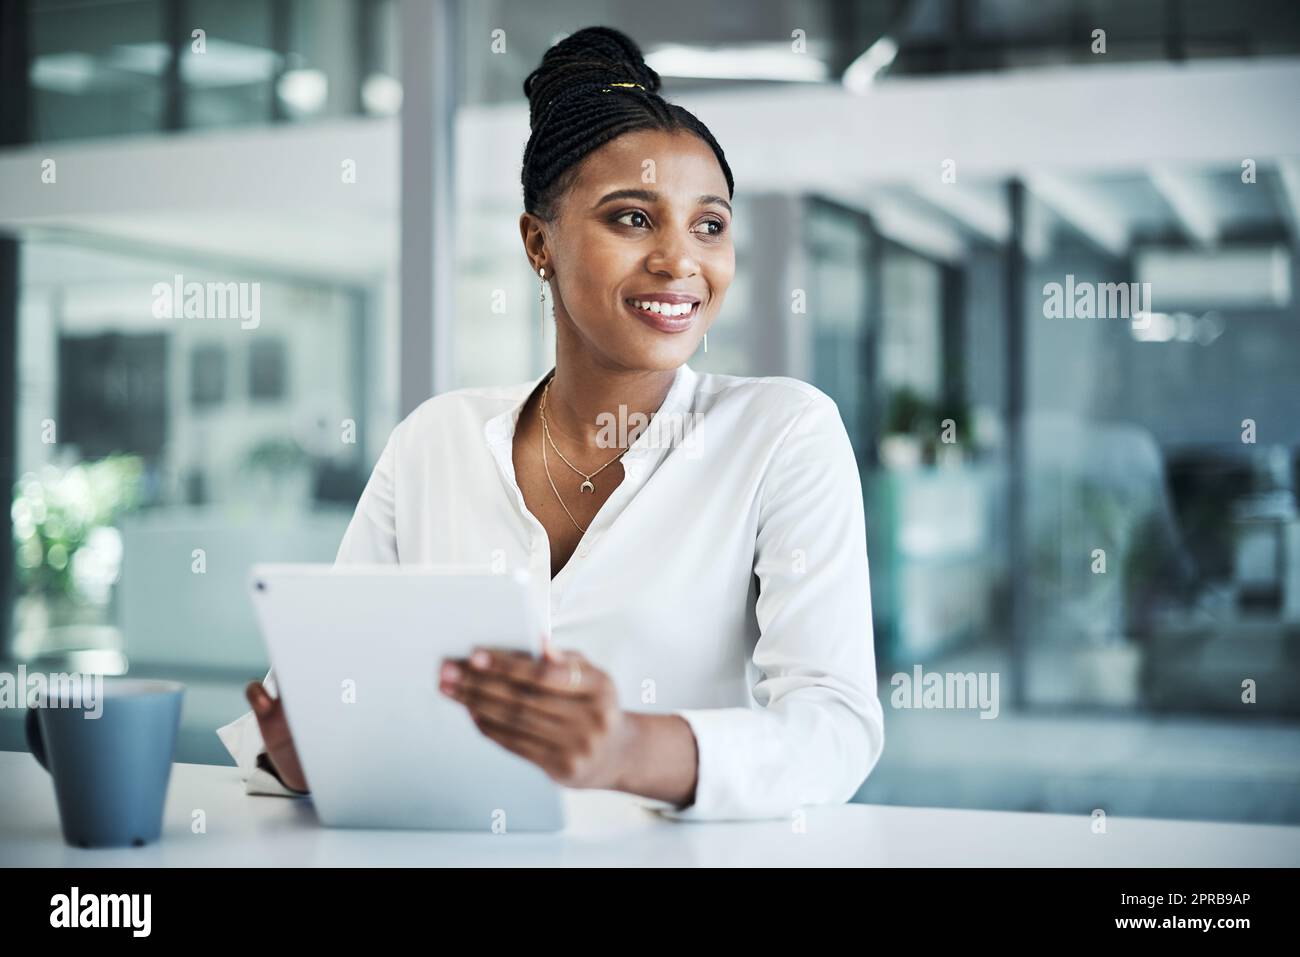 Believe it is yours and youre halfway there. an attractive young businesswoman sitting alone in her office and using a digital tablet. Stock Photo